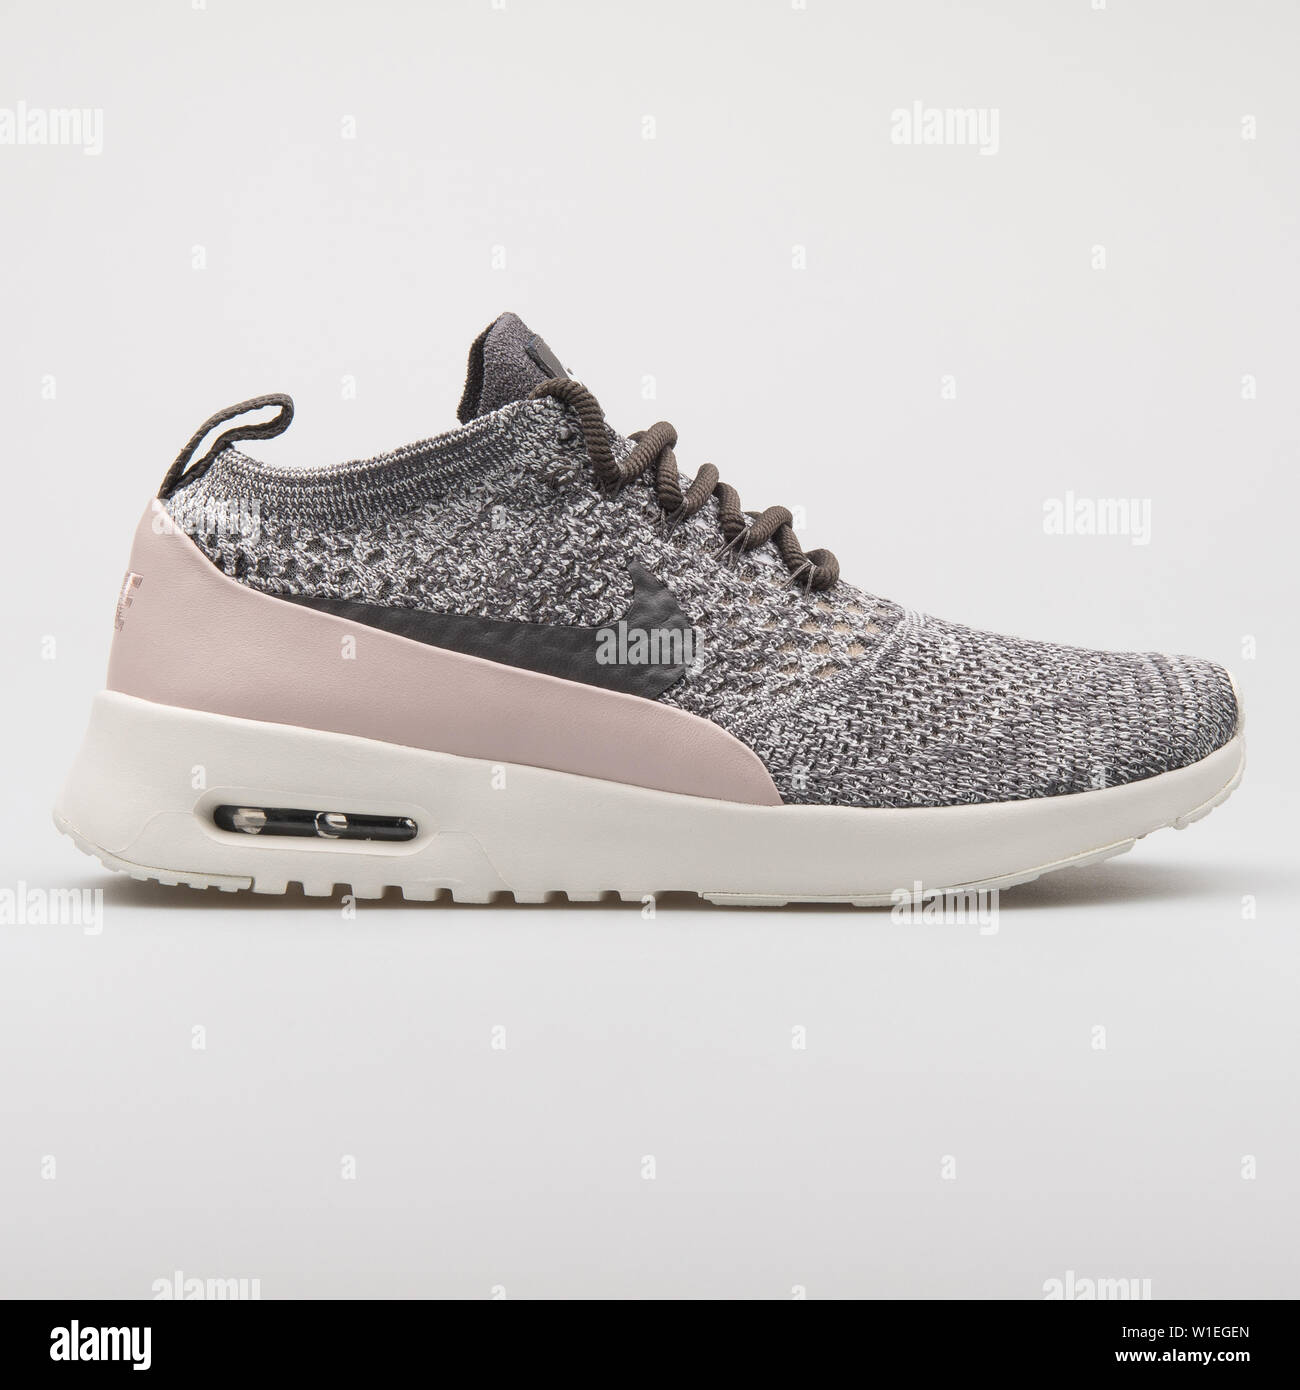 VIENNA, AUSTRIA - AUGUST 7, 2017: Nike Air Max Thea Ultra Flyknit grey and pink sneaker on white background Photo - Alamy